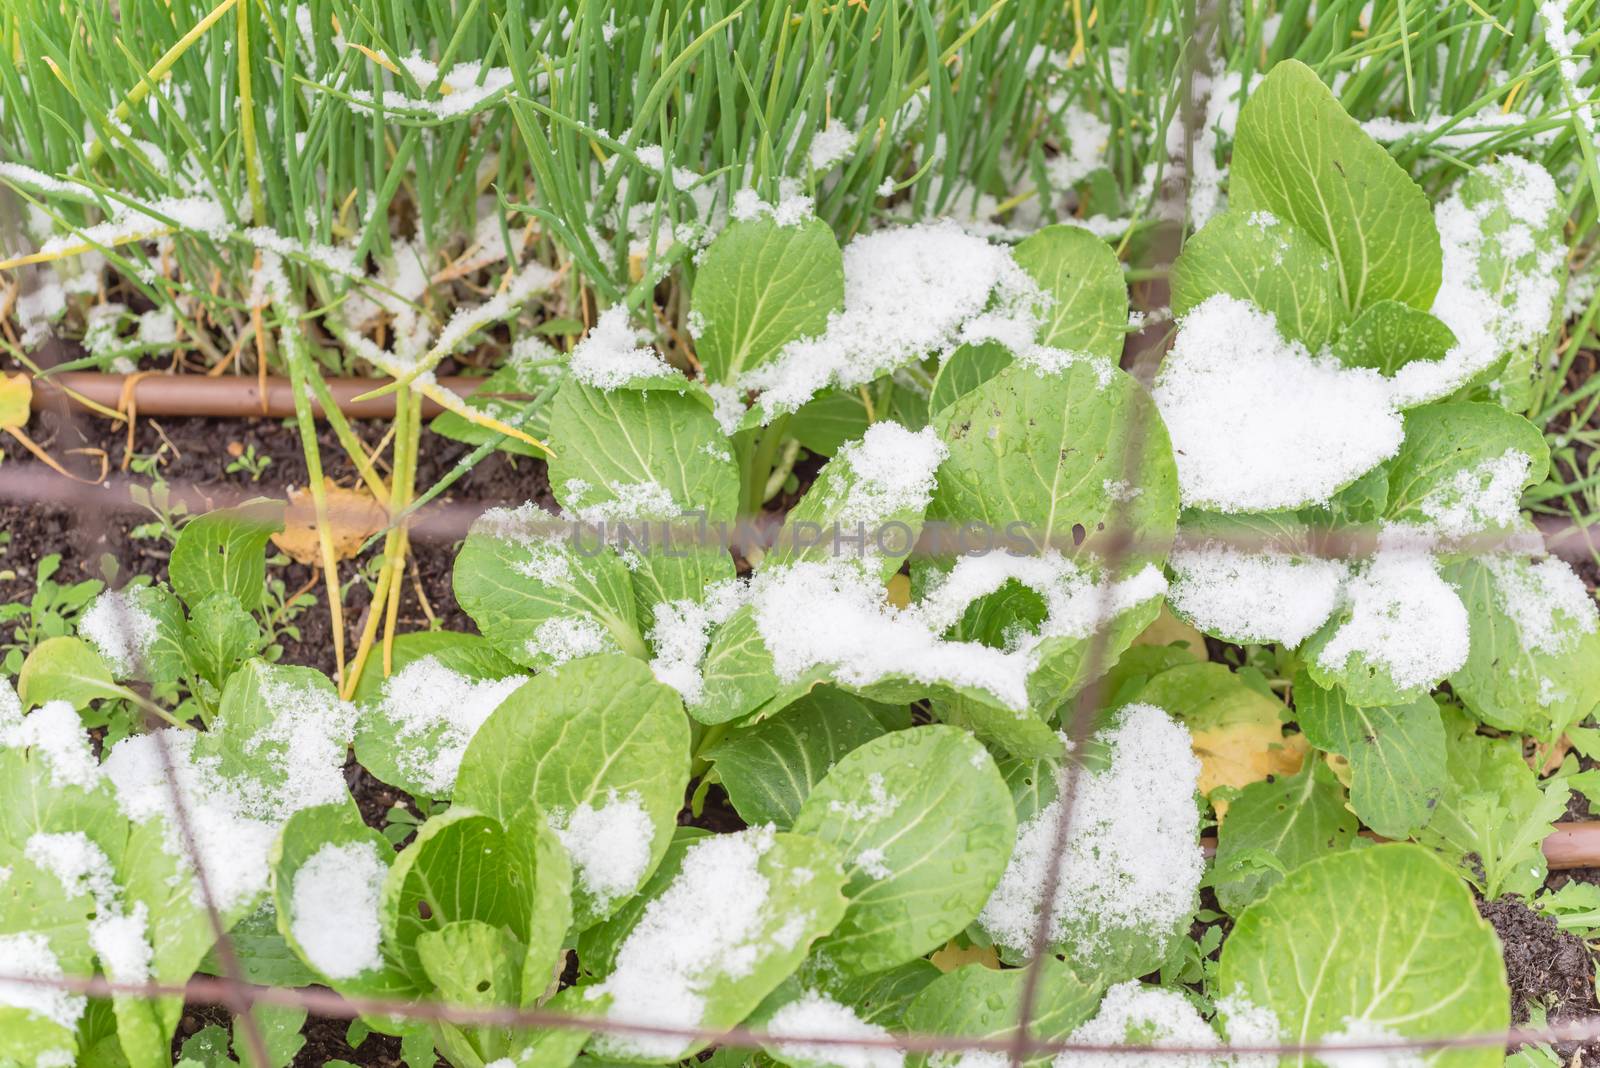 Green onion and bok choy or pak choi, pok choi on raised bed garden in snow covered near Dallas, Texas, America. Chinese cabbage Chinensis varieties heads, green leaf blades